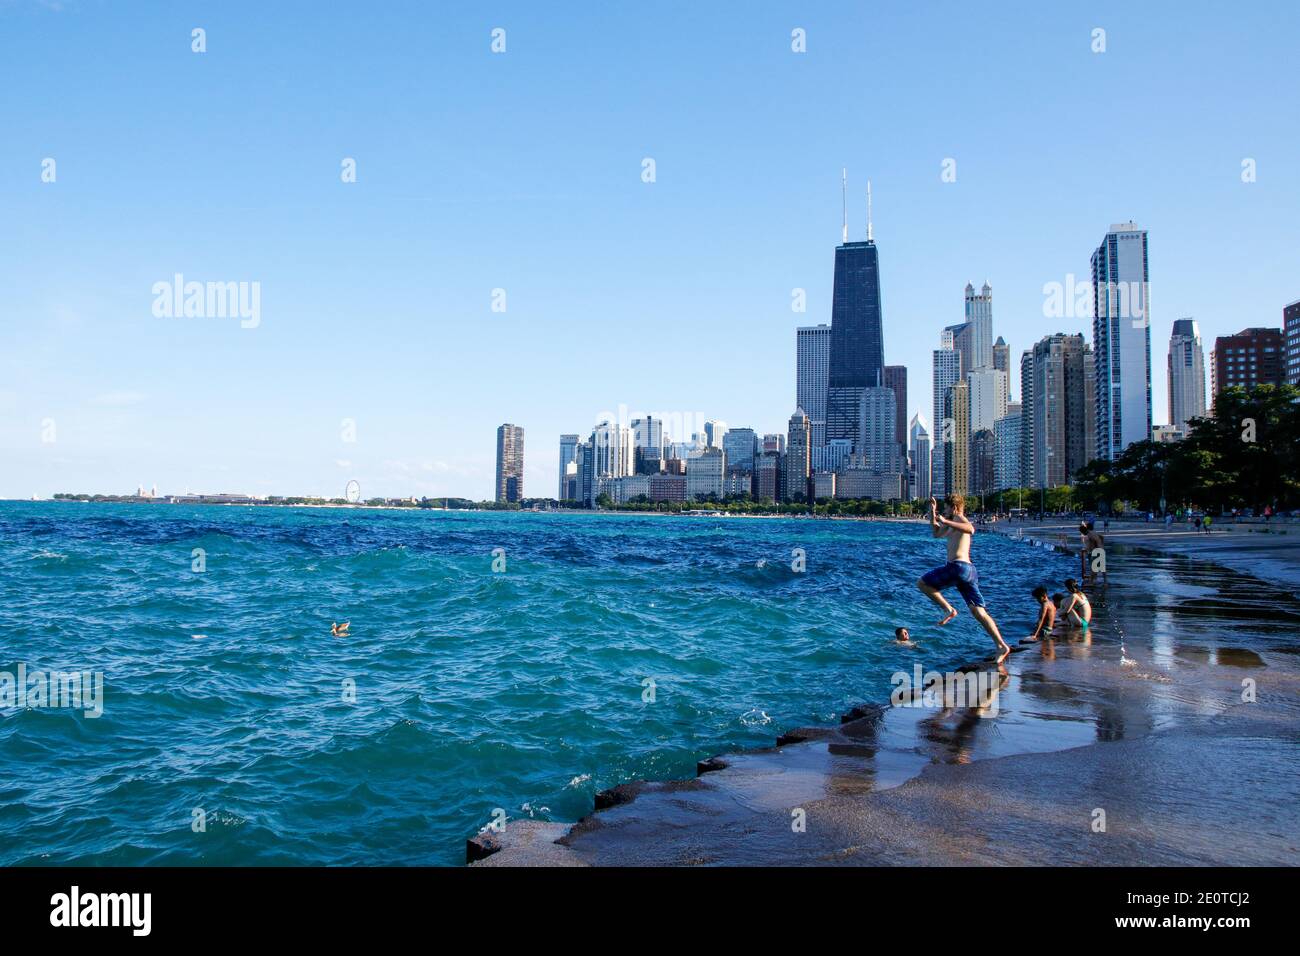 Chicago lakefront near North Avenue Beach. Young man jumping from seawall into lake. Stock Photo